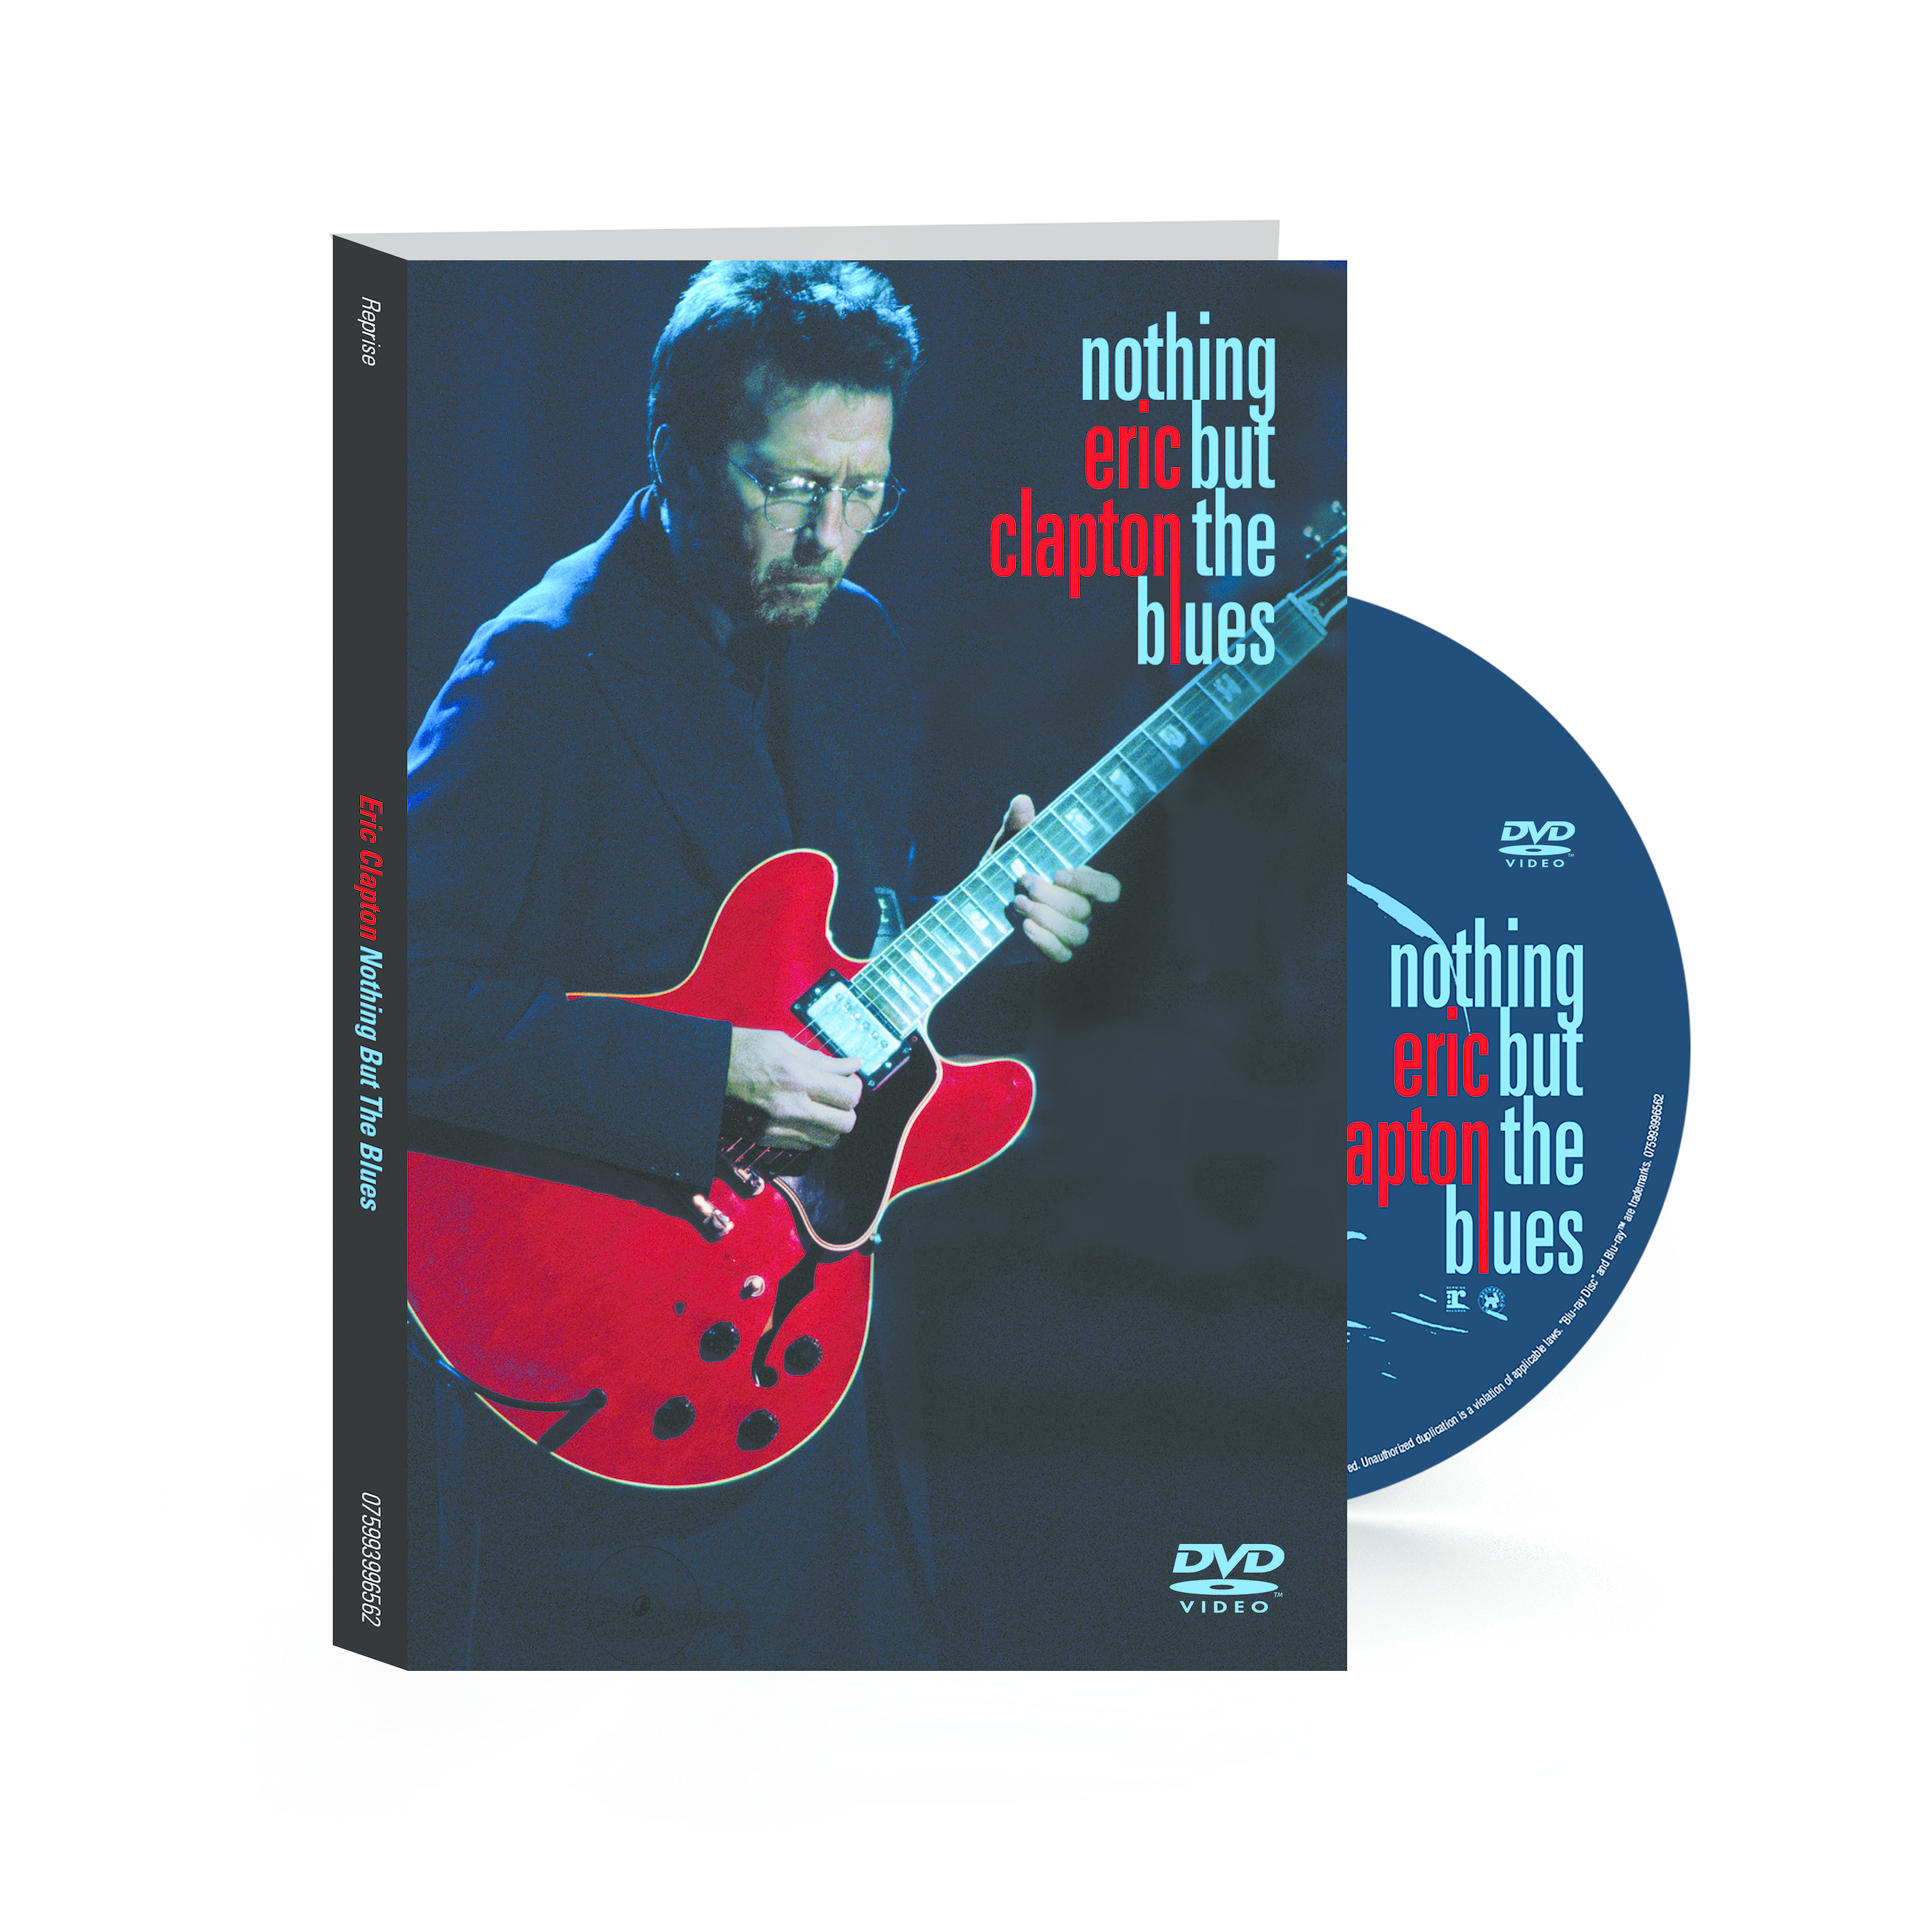 Eric Clapton - NOTHING THE BLUES - (DVD) BUT